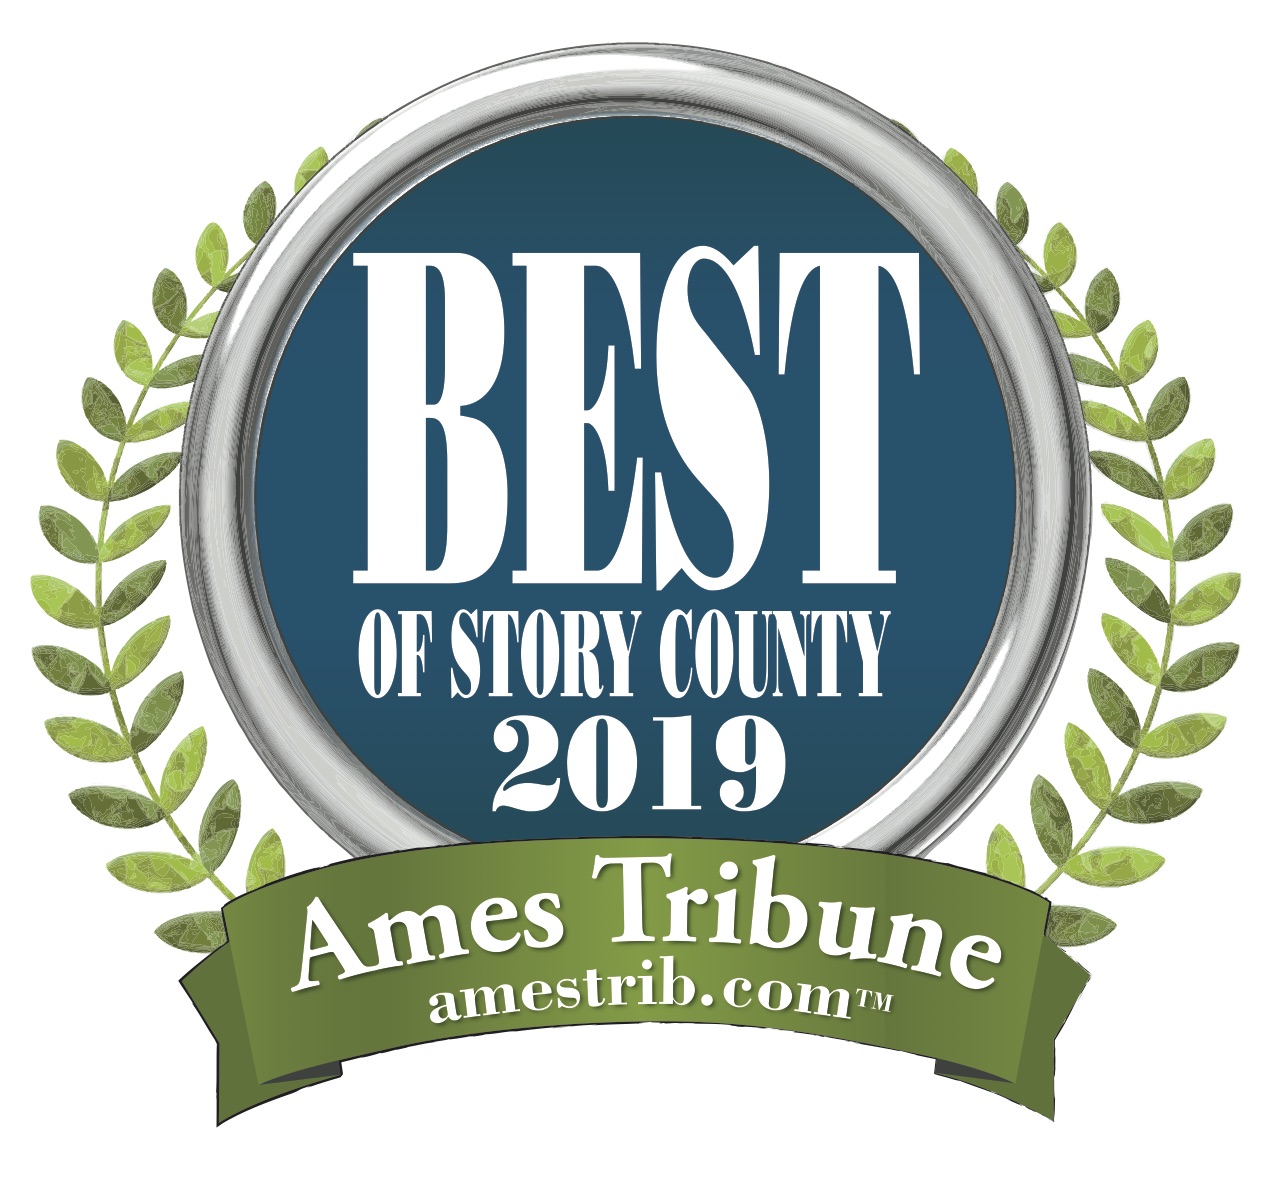 Best of Story County 2019